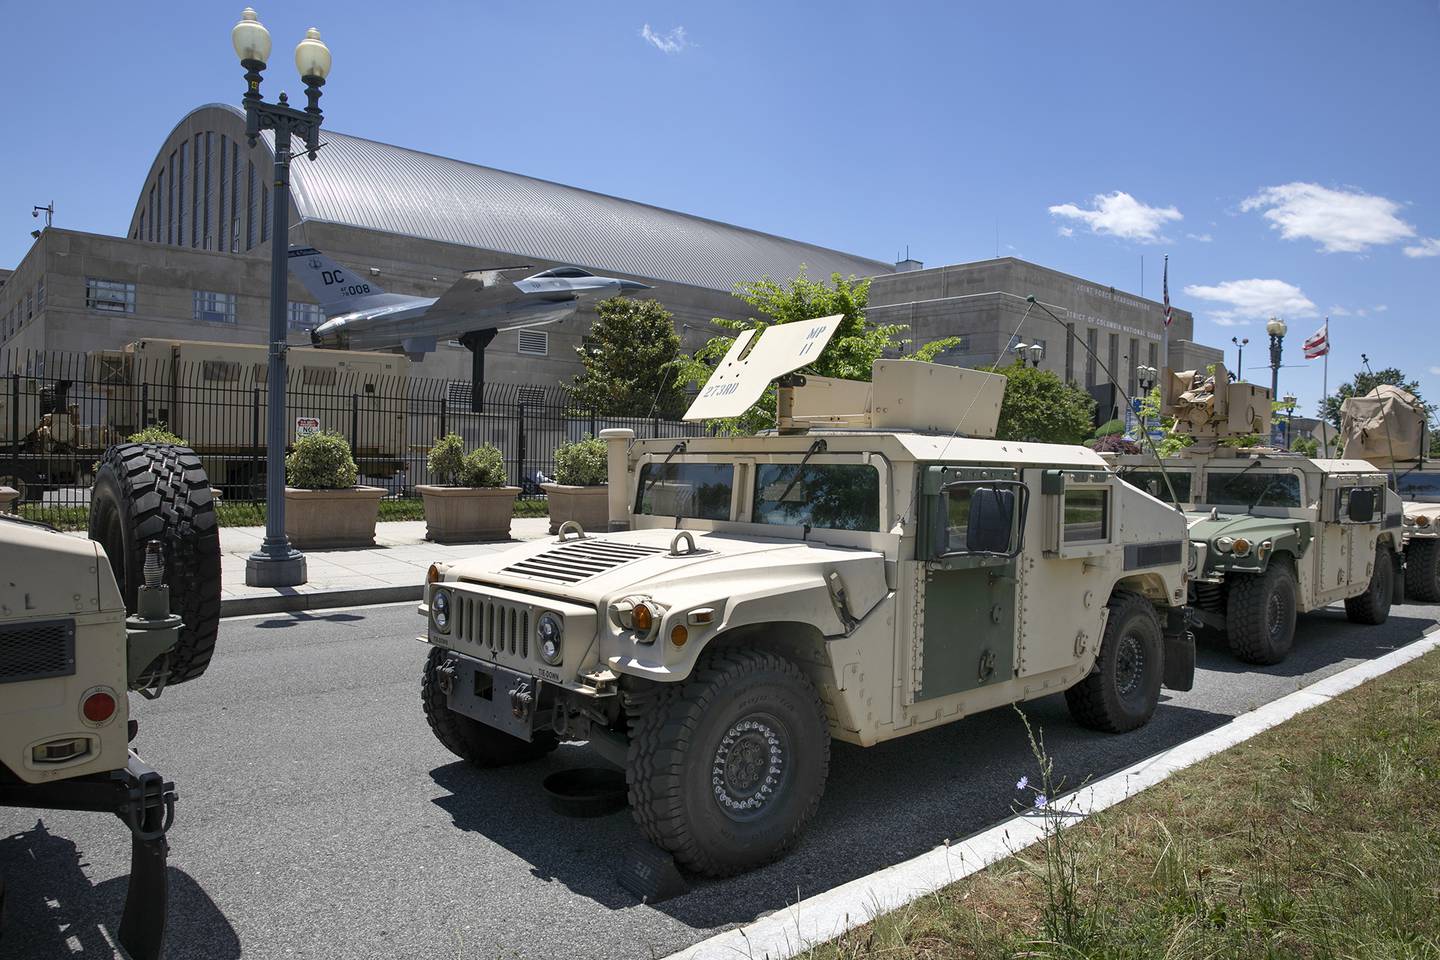 Vehicles for the District of Columbia National Guard are seen outside the D.C. Armory, Monday, June 1, 2020, in Washington.